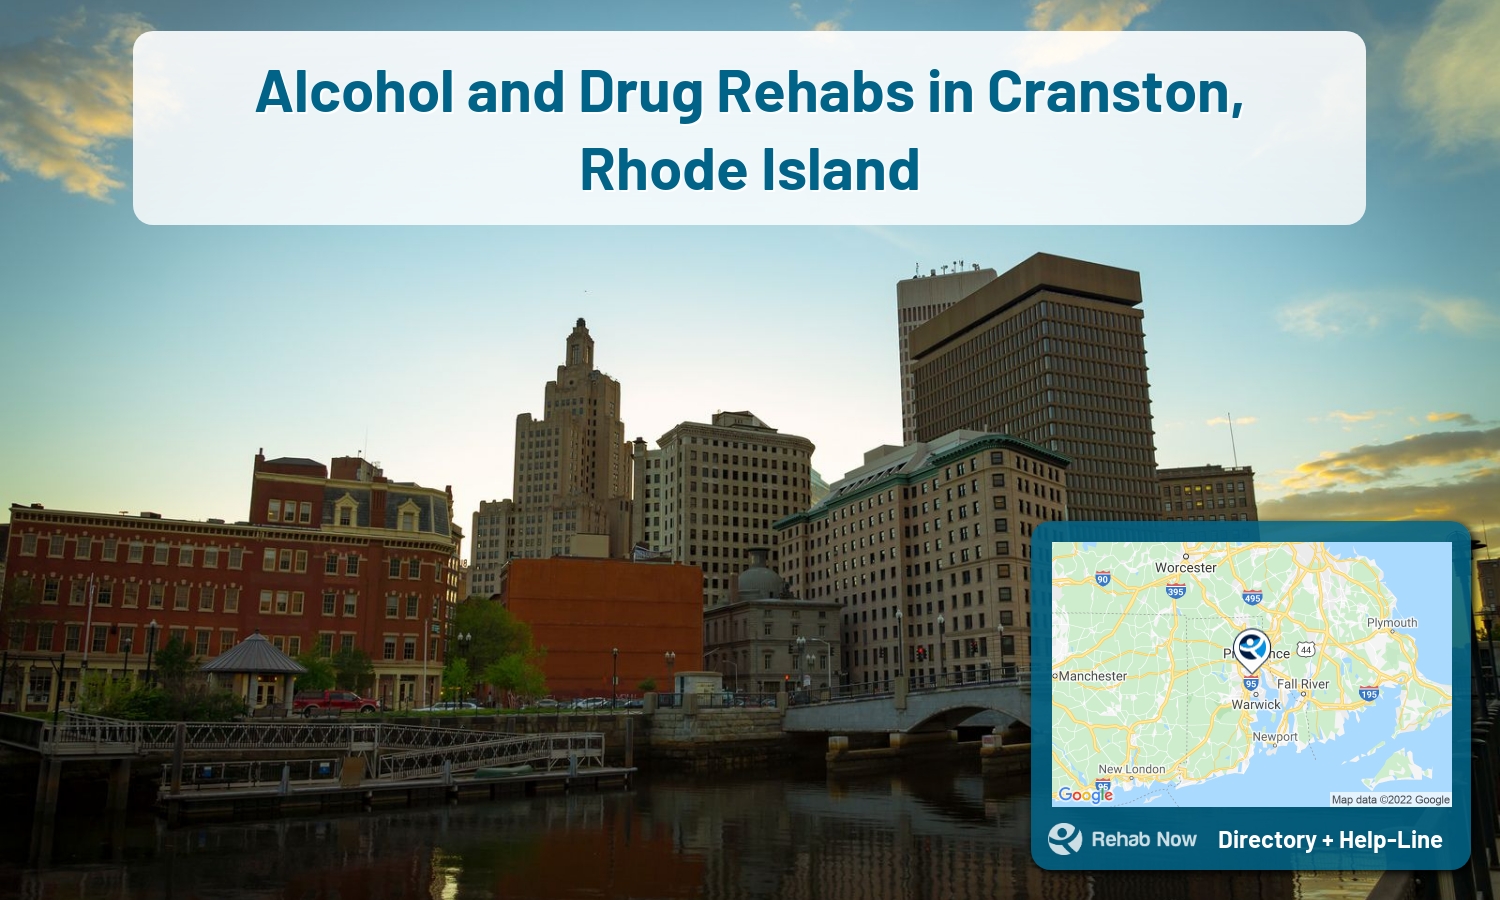 Ready to pick a rehab center in Cranston? Get off alcohol, opiates, and other drugs, by selecting top drug rehab centers in Rhode Island